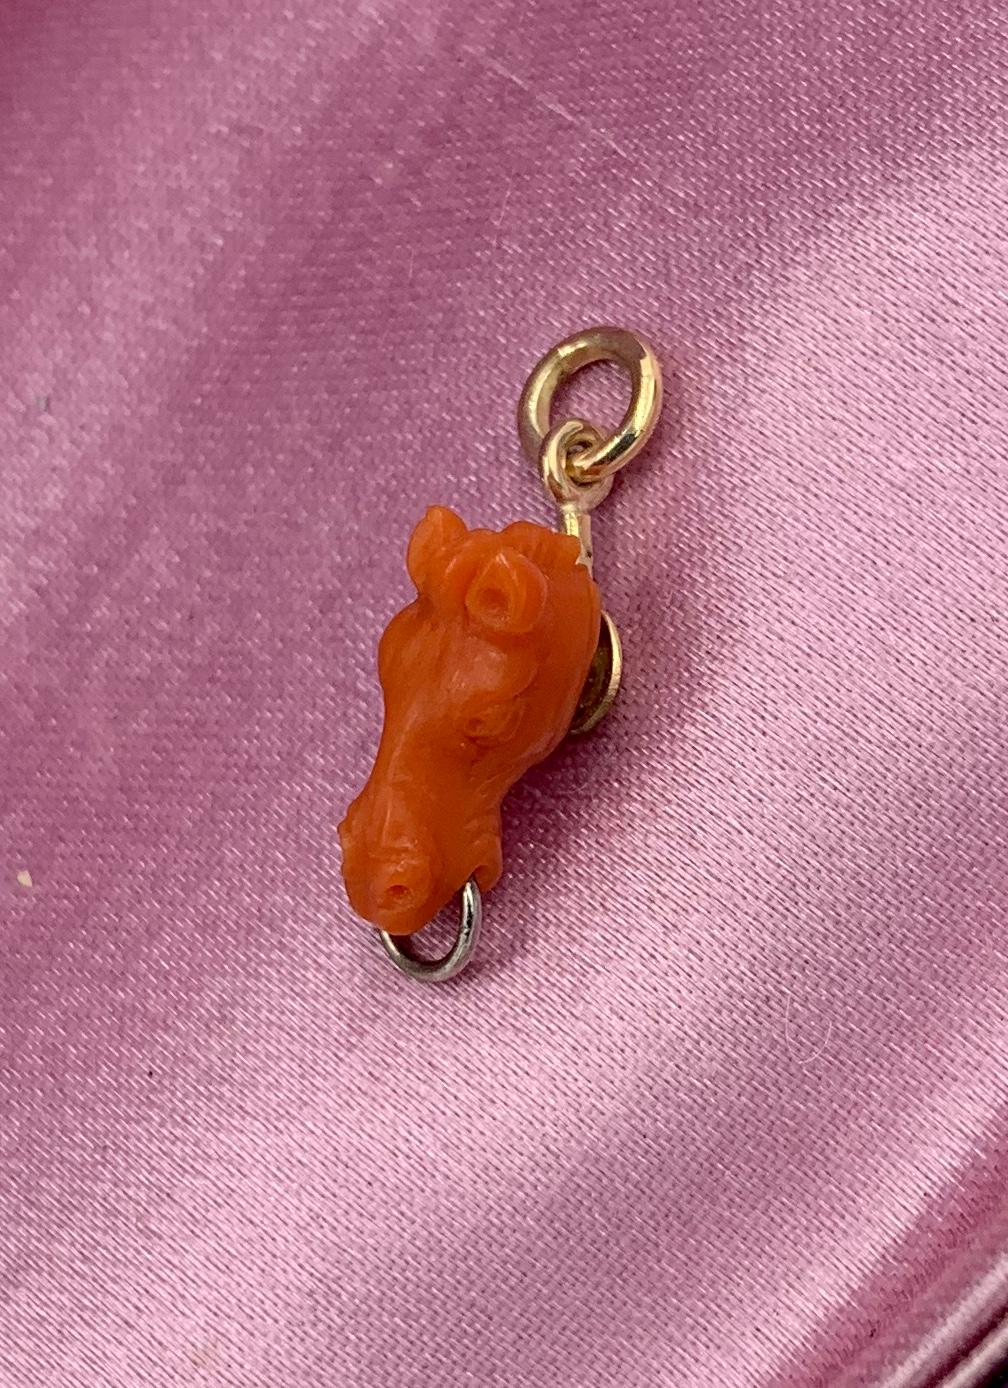 A stunning antique Victorian - Art Deco Pendant or Charm of a Horse head in gorgeous hand carved natural Coral.  The coral horse head pendant is a masterpiece of artistic expression - the face is carved with exquisite detail throughout!  The horse